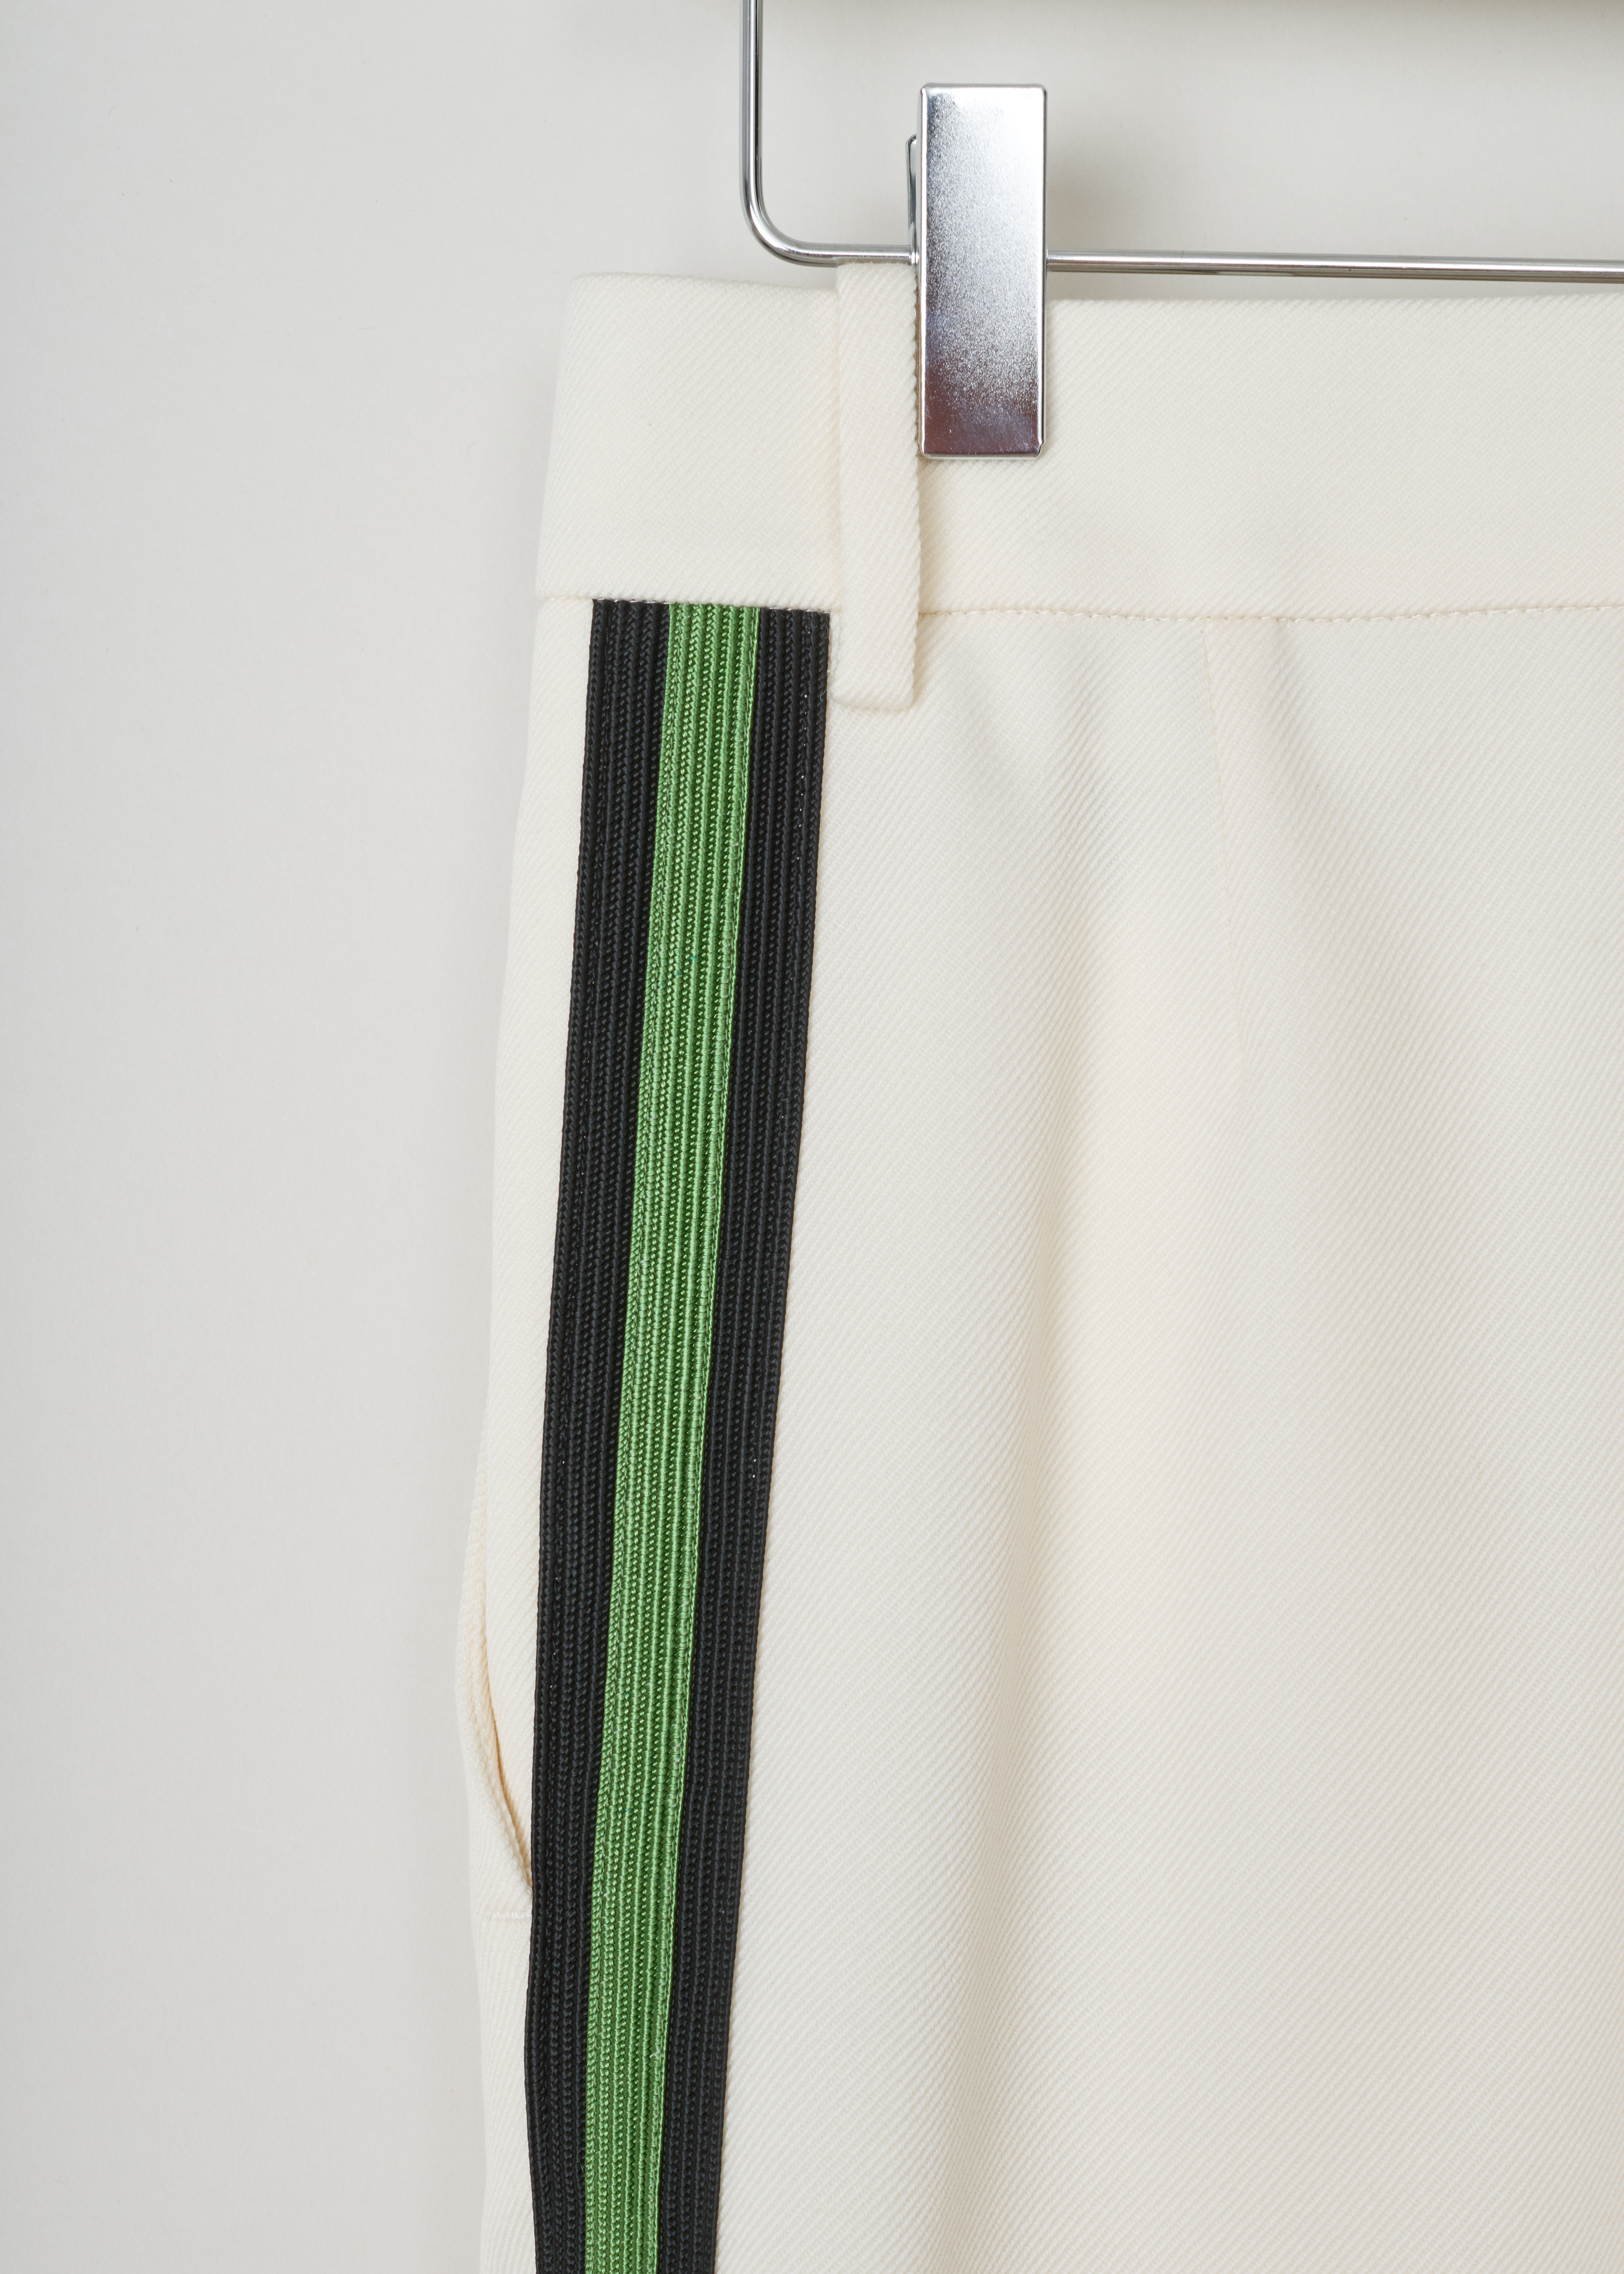 Calvin Klein 205W39NYC Off-white pants with ribbon trim
74WWPA47_W023_101 white detail. Off-white wool pants with a green and black side ribbon trim.
These straight pants have two slant pockets on the front and a welt pocket on the back.